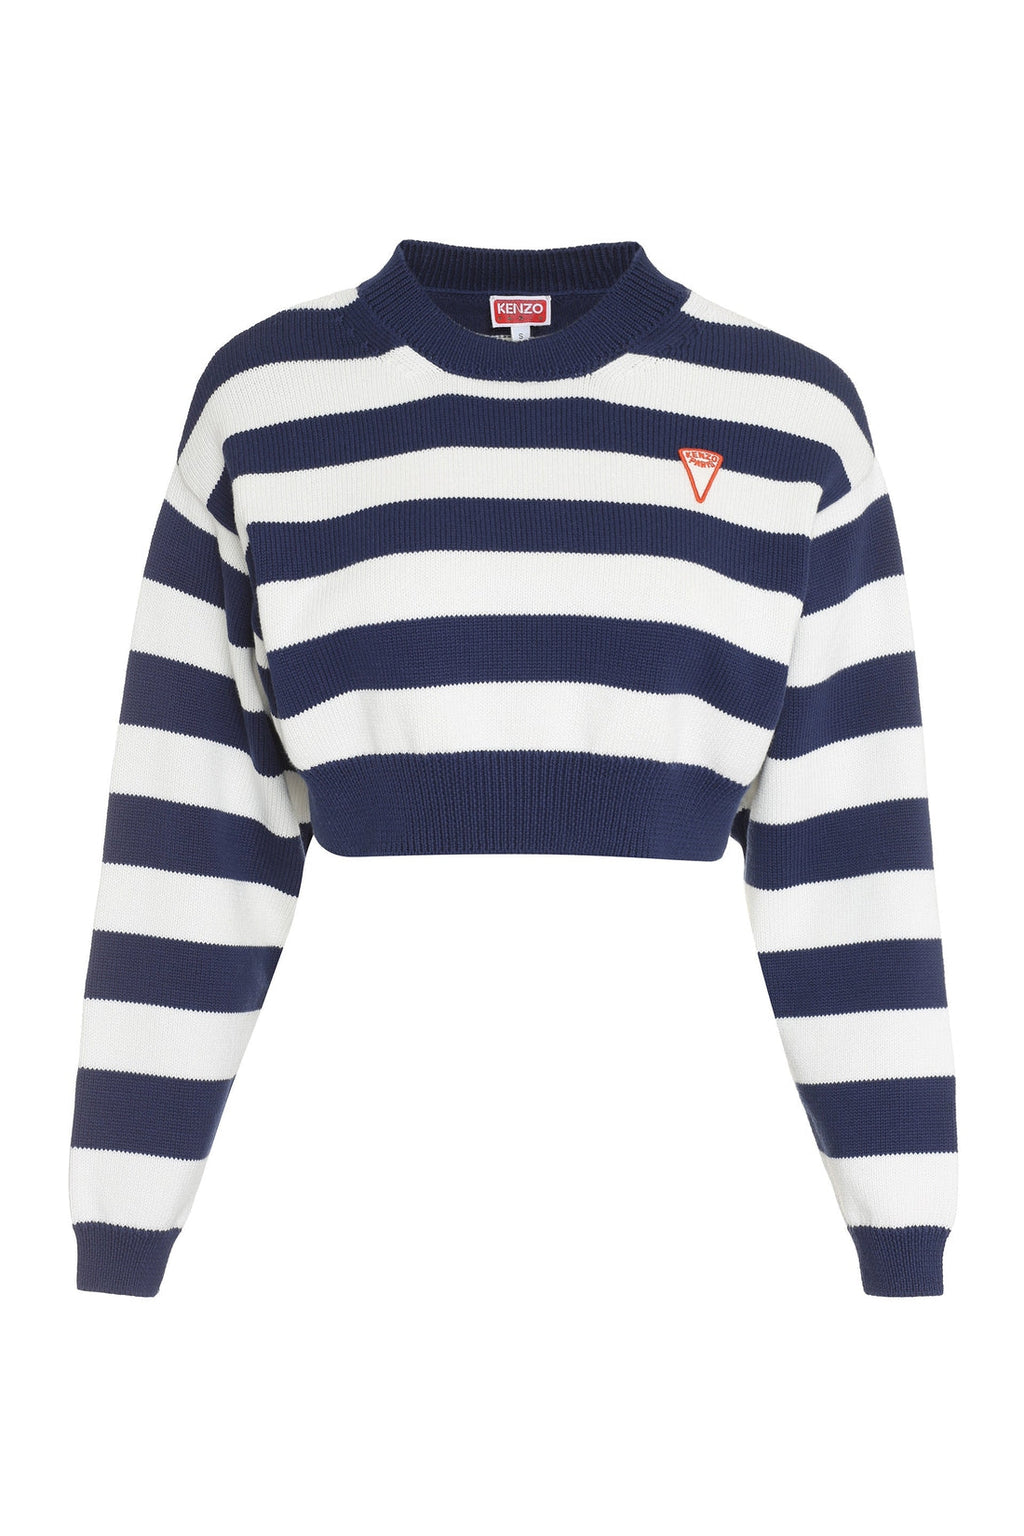 Kenzo-OUTLET-SALE-Striped crew-neck pullover-ARCHIVIST